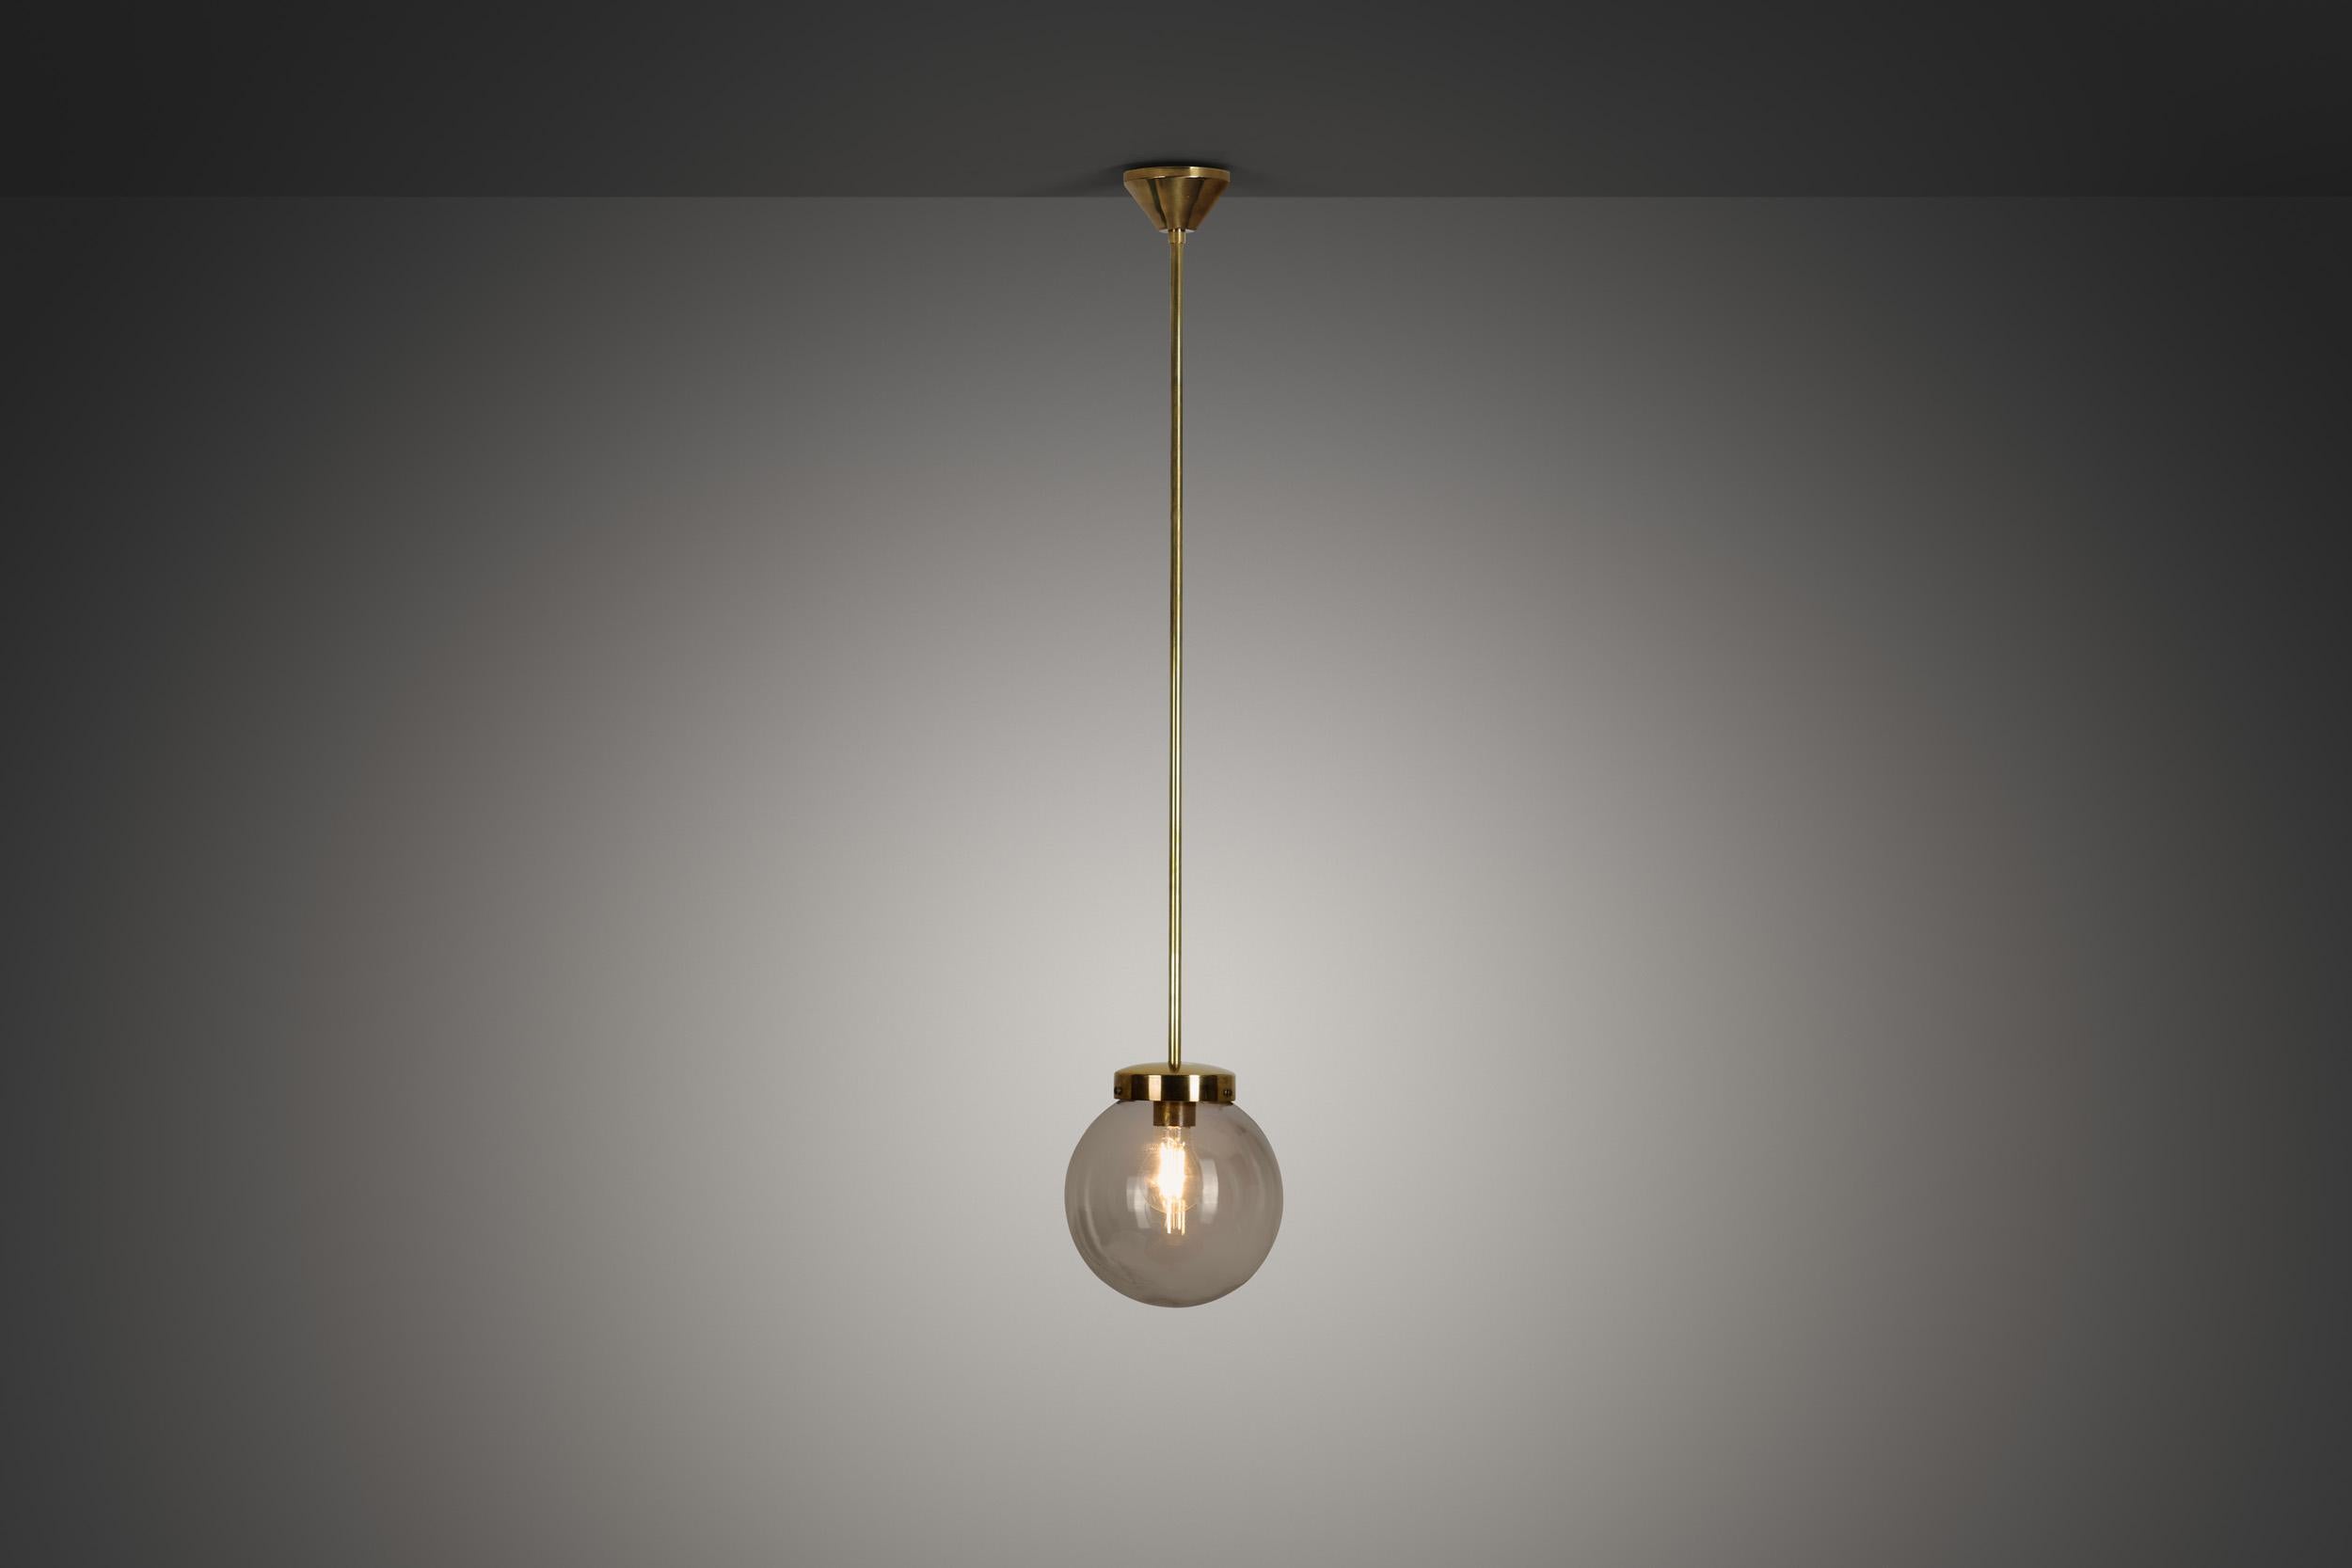 The best thing about hanging ceiling lights - besides their stylish look - is that they are the best option to make interiors appear more spacious. They can be used them to concentrate light, or to just add an accent to the room.

This lamp’s design